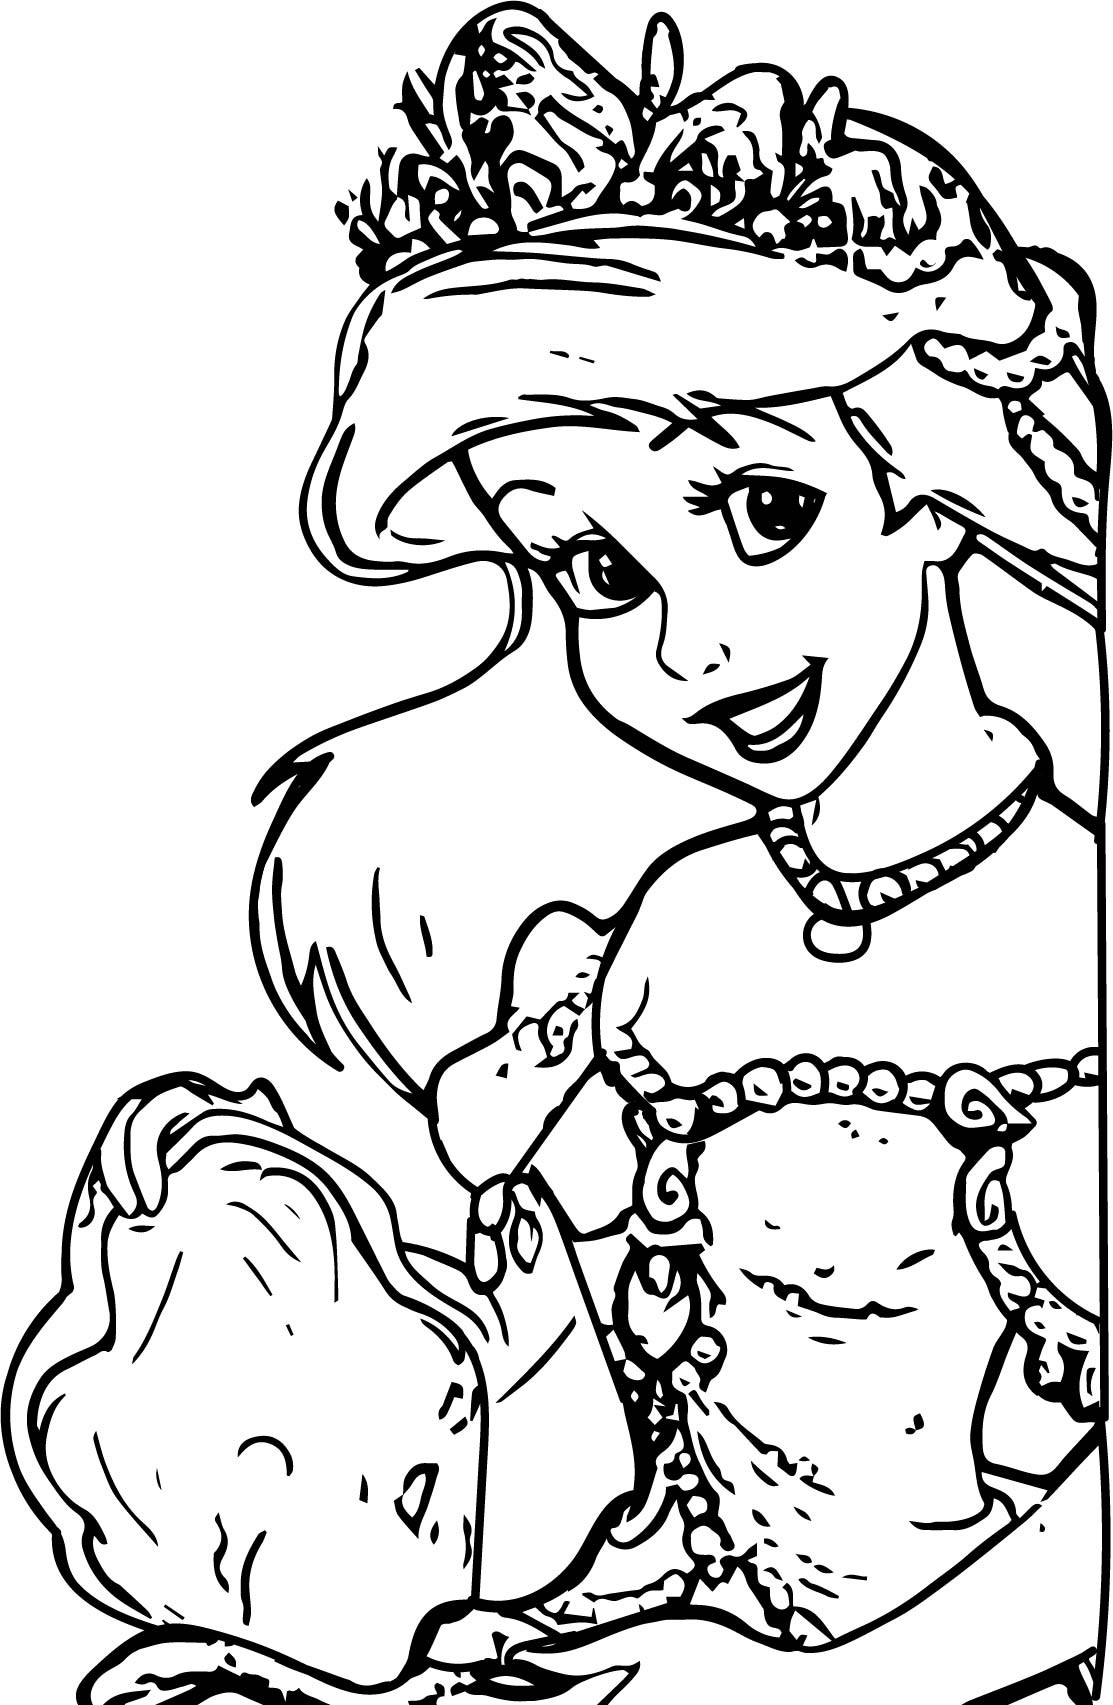 Baby Princesses Coloring Pages
 Baby Disney Princesses Coloring Pages at GetColorings